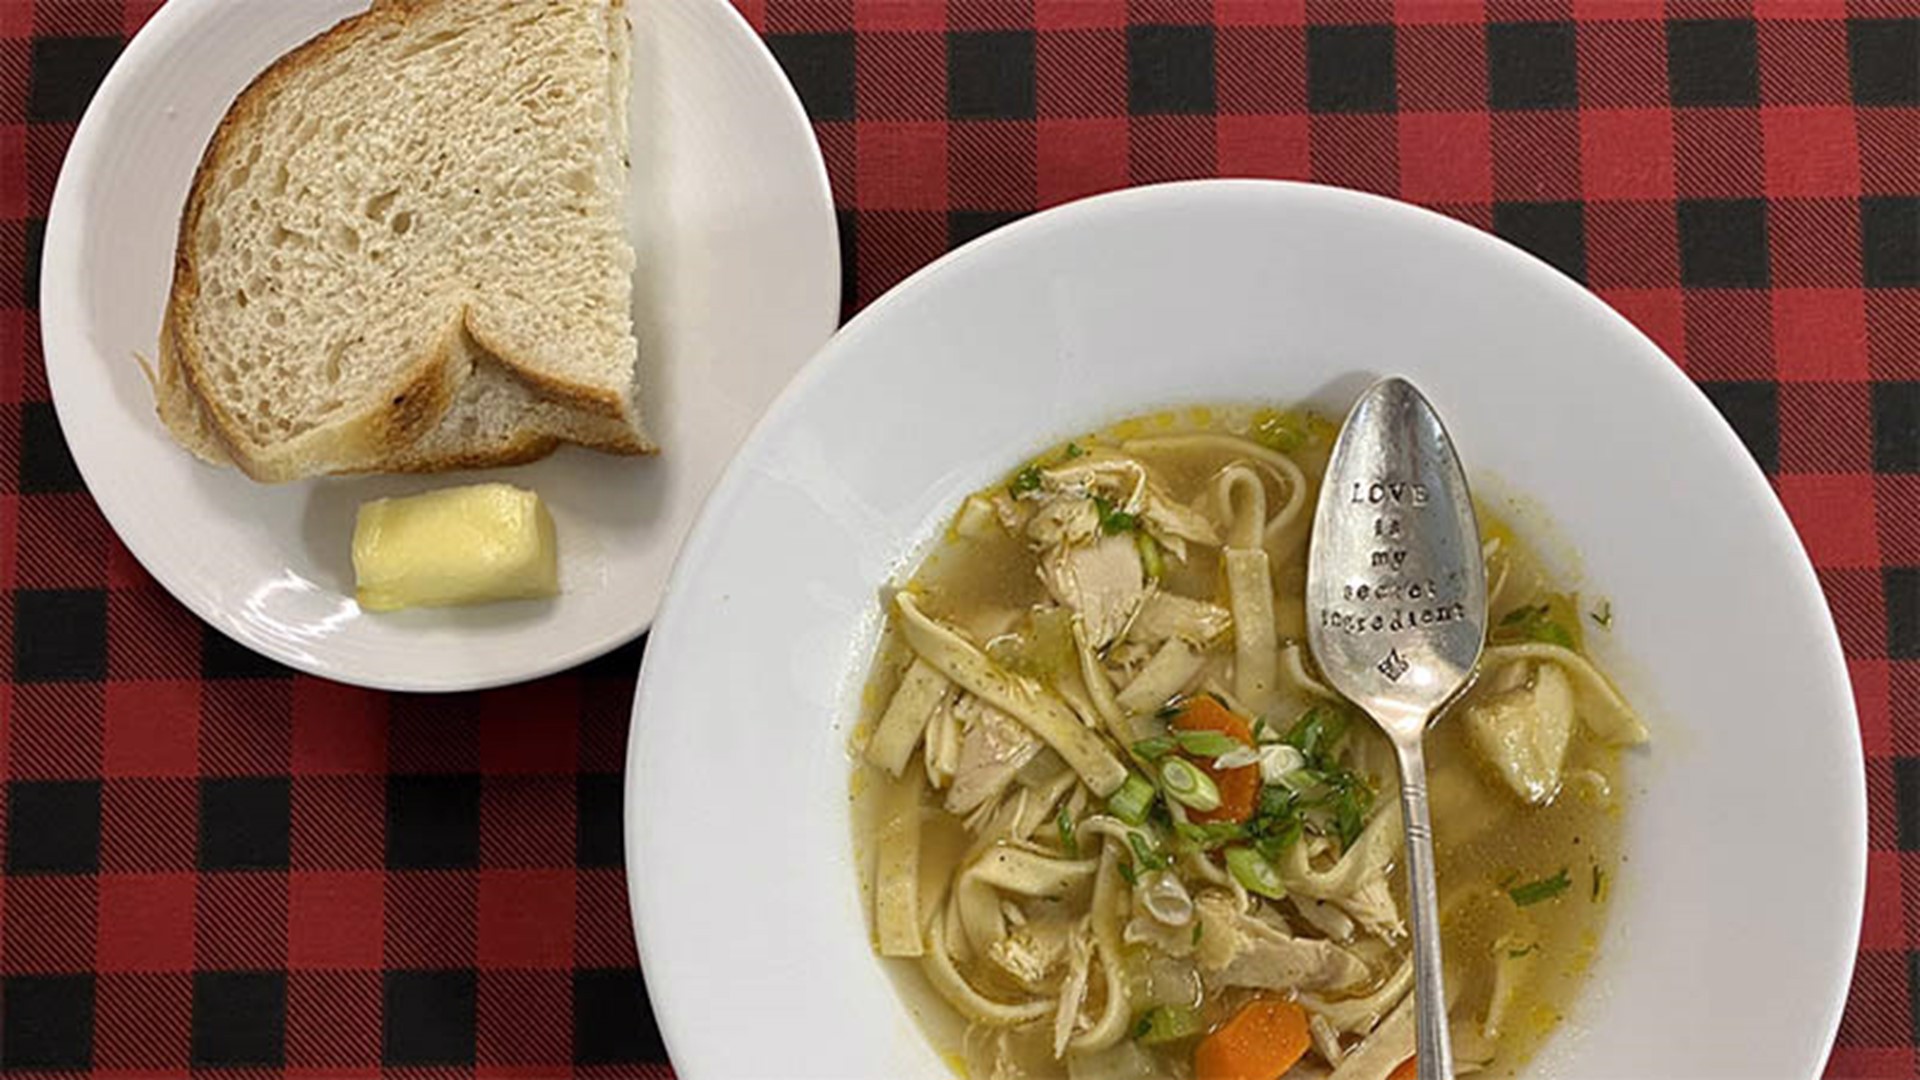 Grab a ladle and a bowl, here are some of Chef Kevin's most iconic soup recipes!